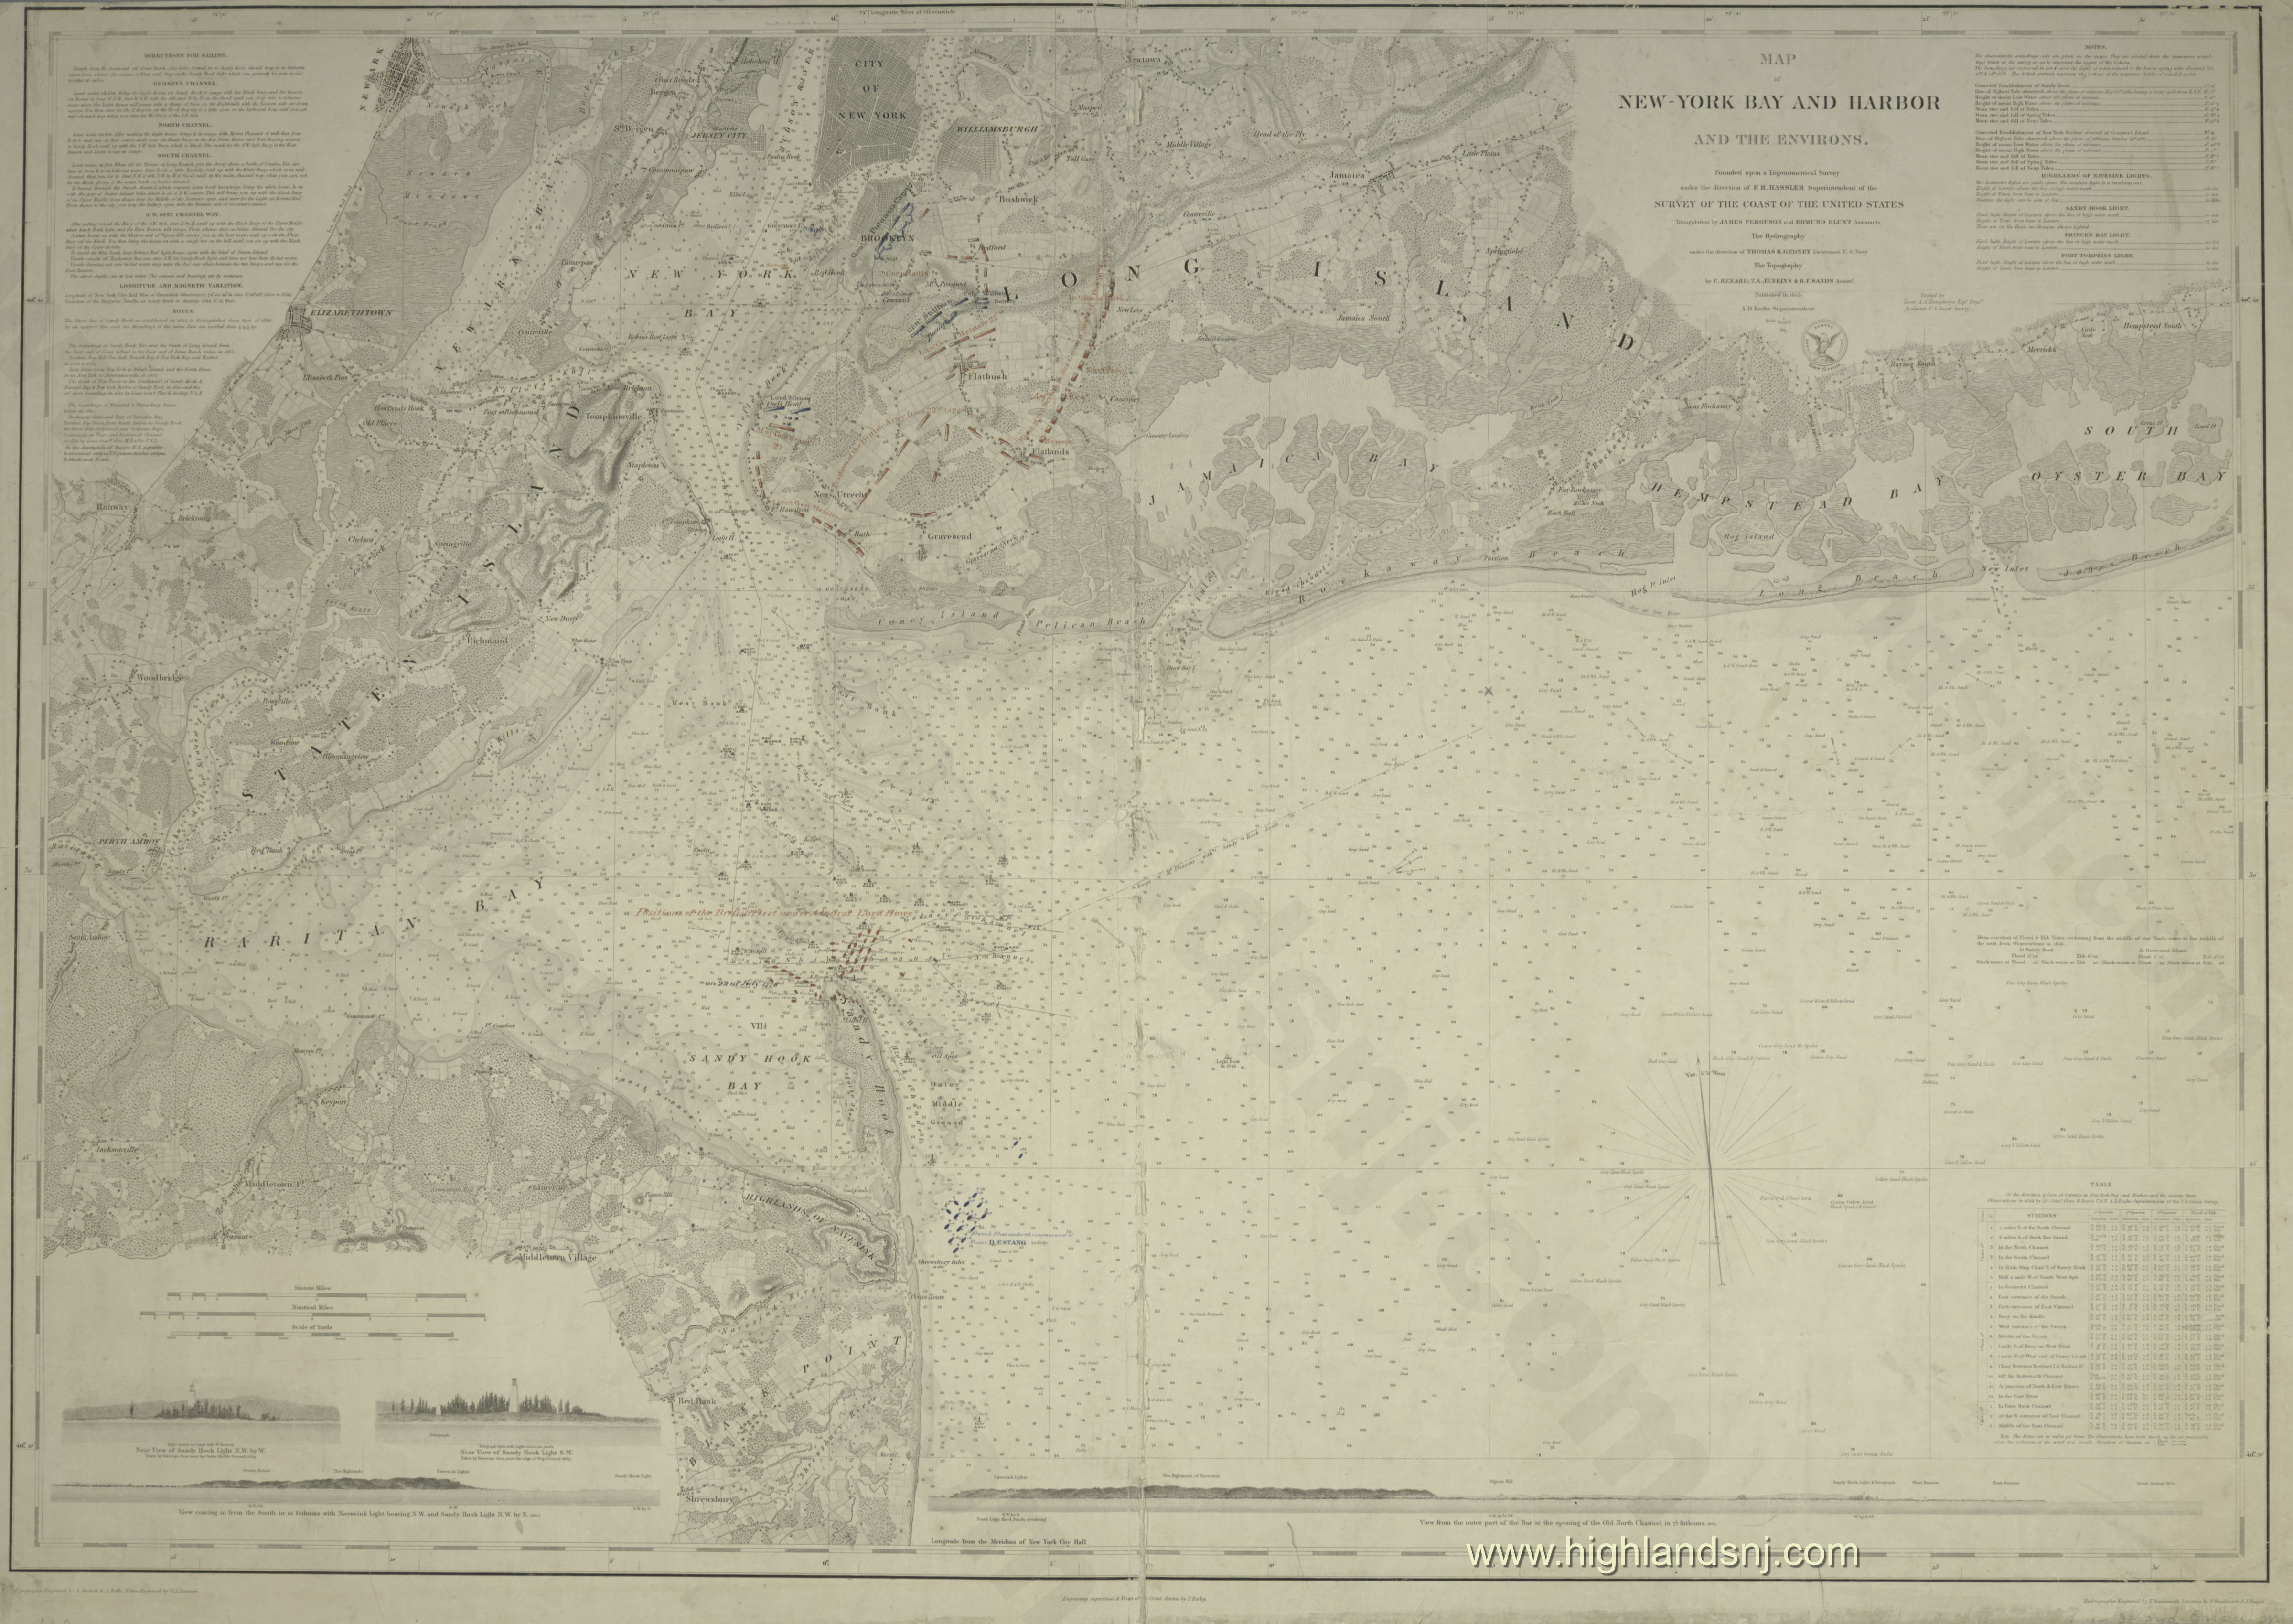 1845 Map of New-York Bay & Harbor and the environs - colored additions to show positions of troops & fleets - Battle of Long Island 1776